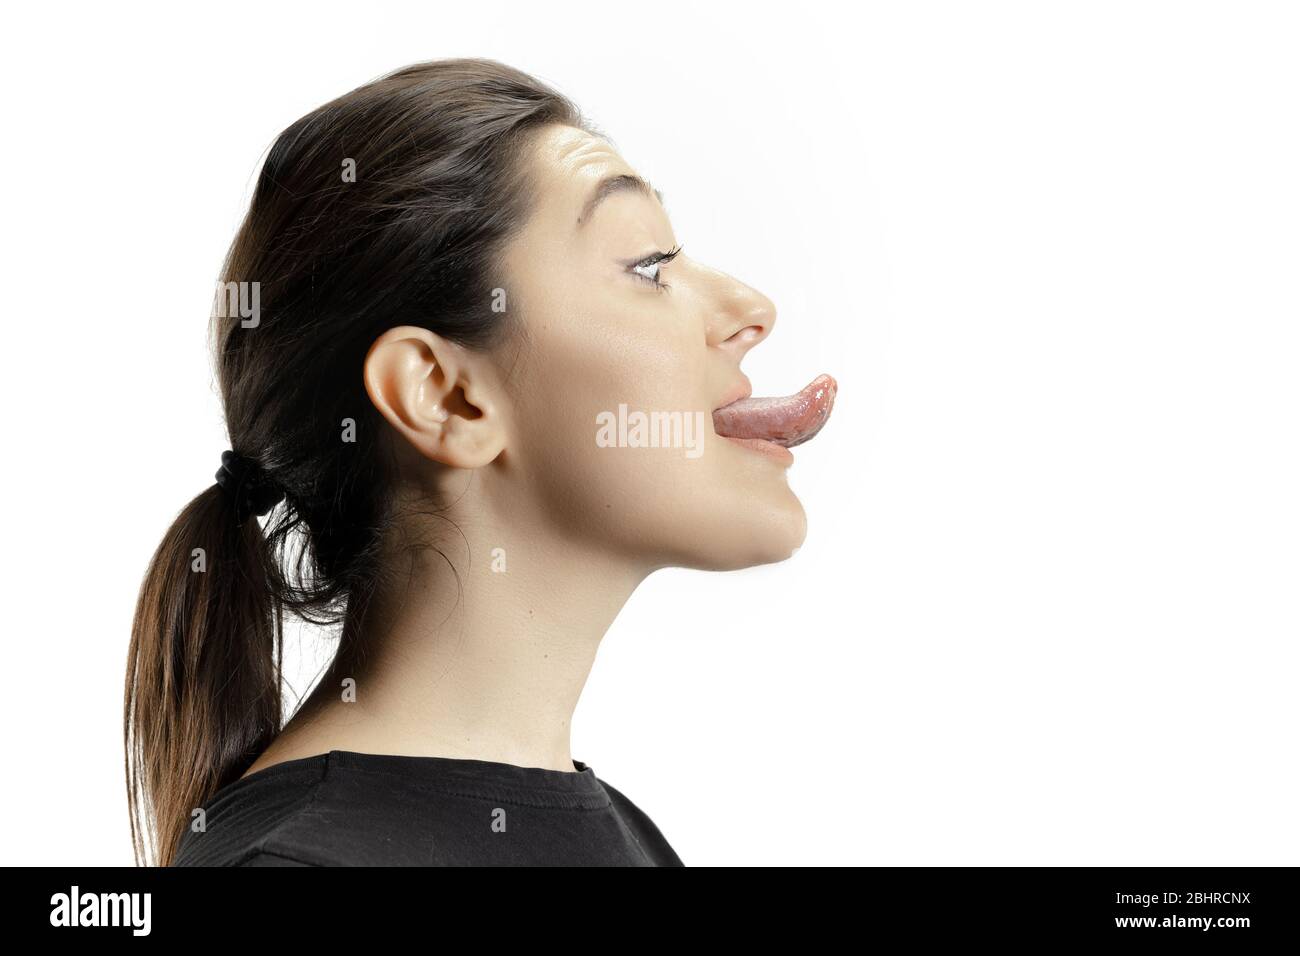 Smiling girl opening her mouth and showing the long big giant tongue isolated on white background. Looks shocked, attracted, wondered and astonished. Copyspace for ad. Human emotions, marketing. Stock Photo